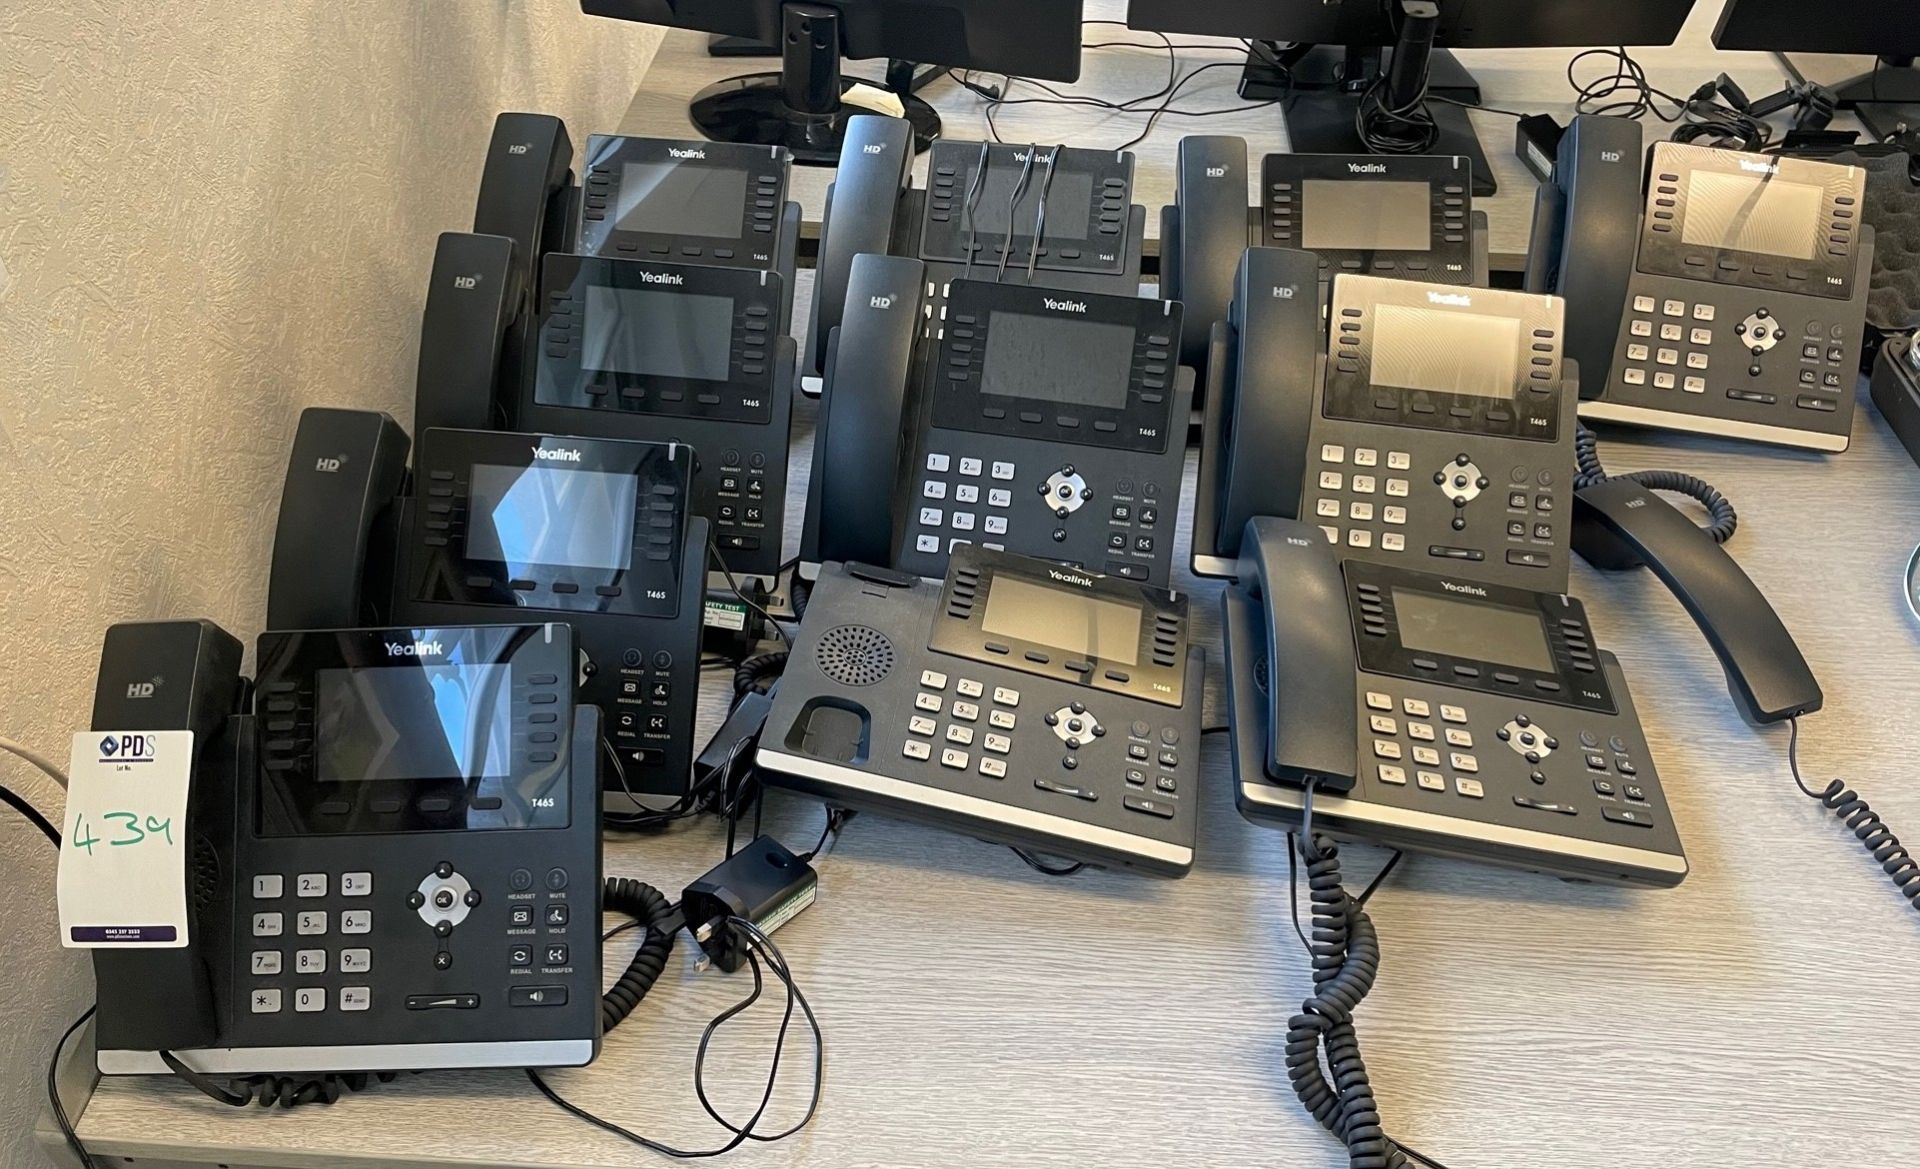 11 Yealink Telephone Handsets (Location Diss. Please Refer to General Notes)